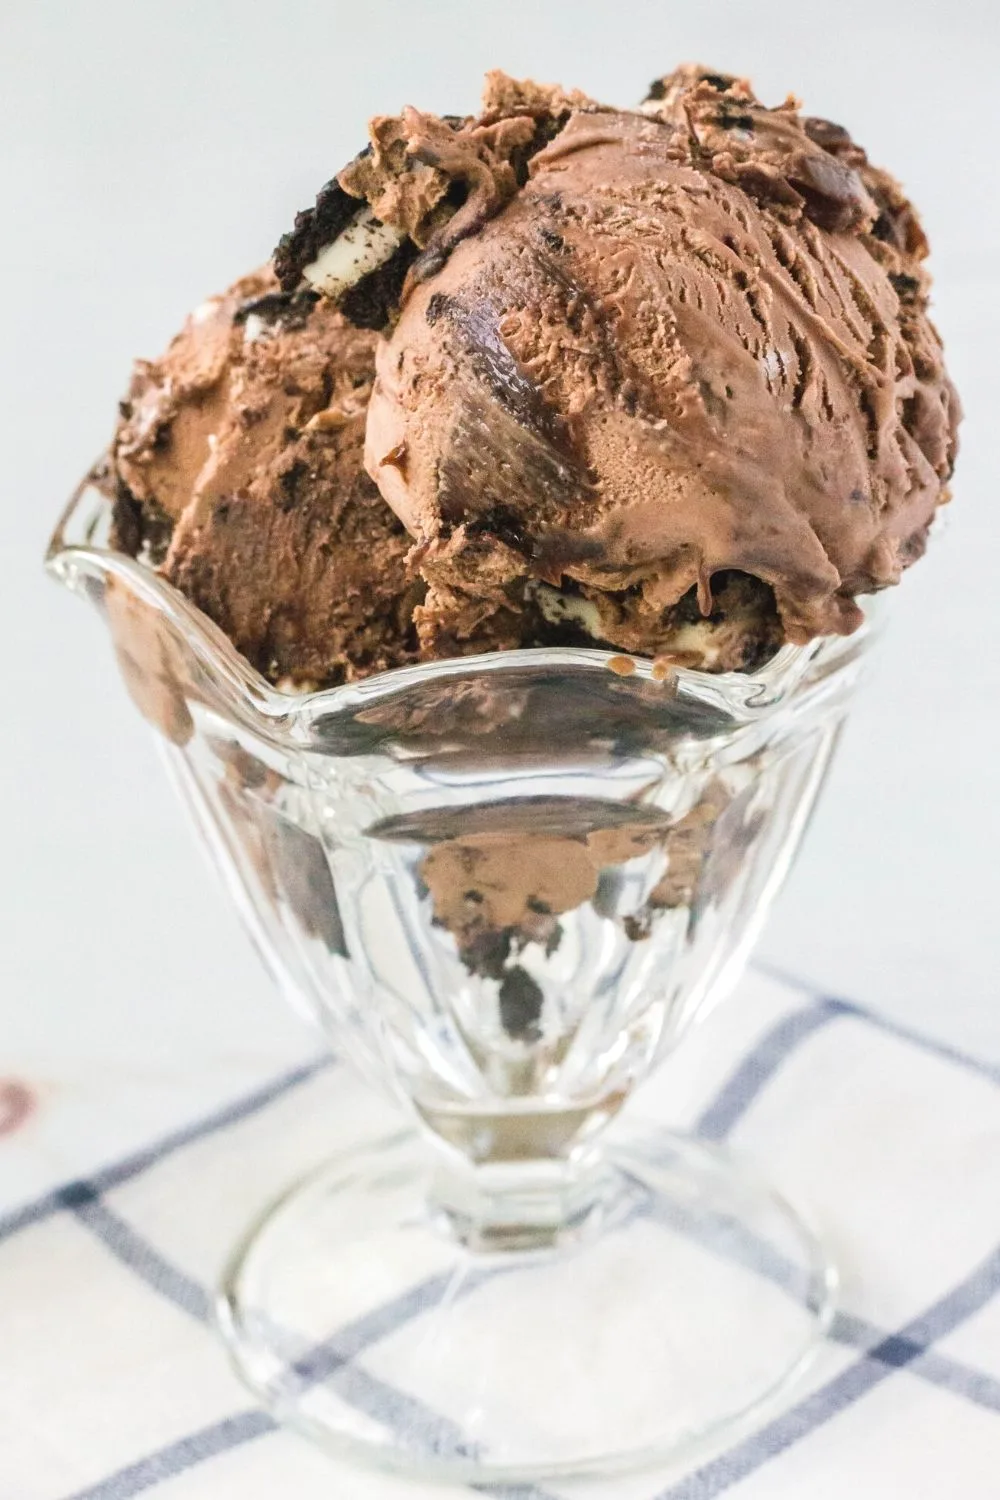 scoops of no-churn mississippi mud ice cream are served in a glass ice cream dish.